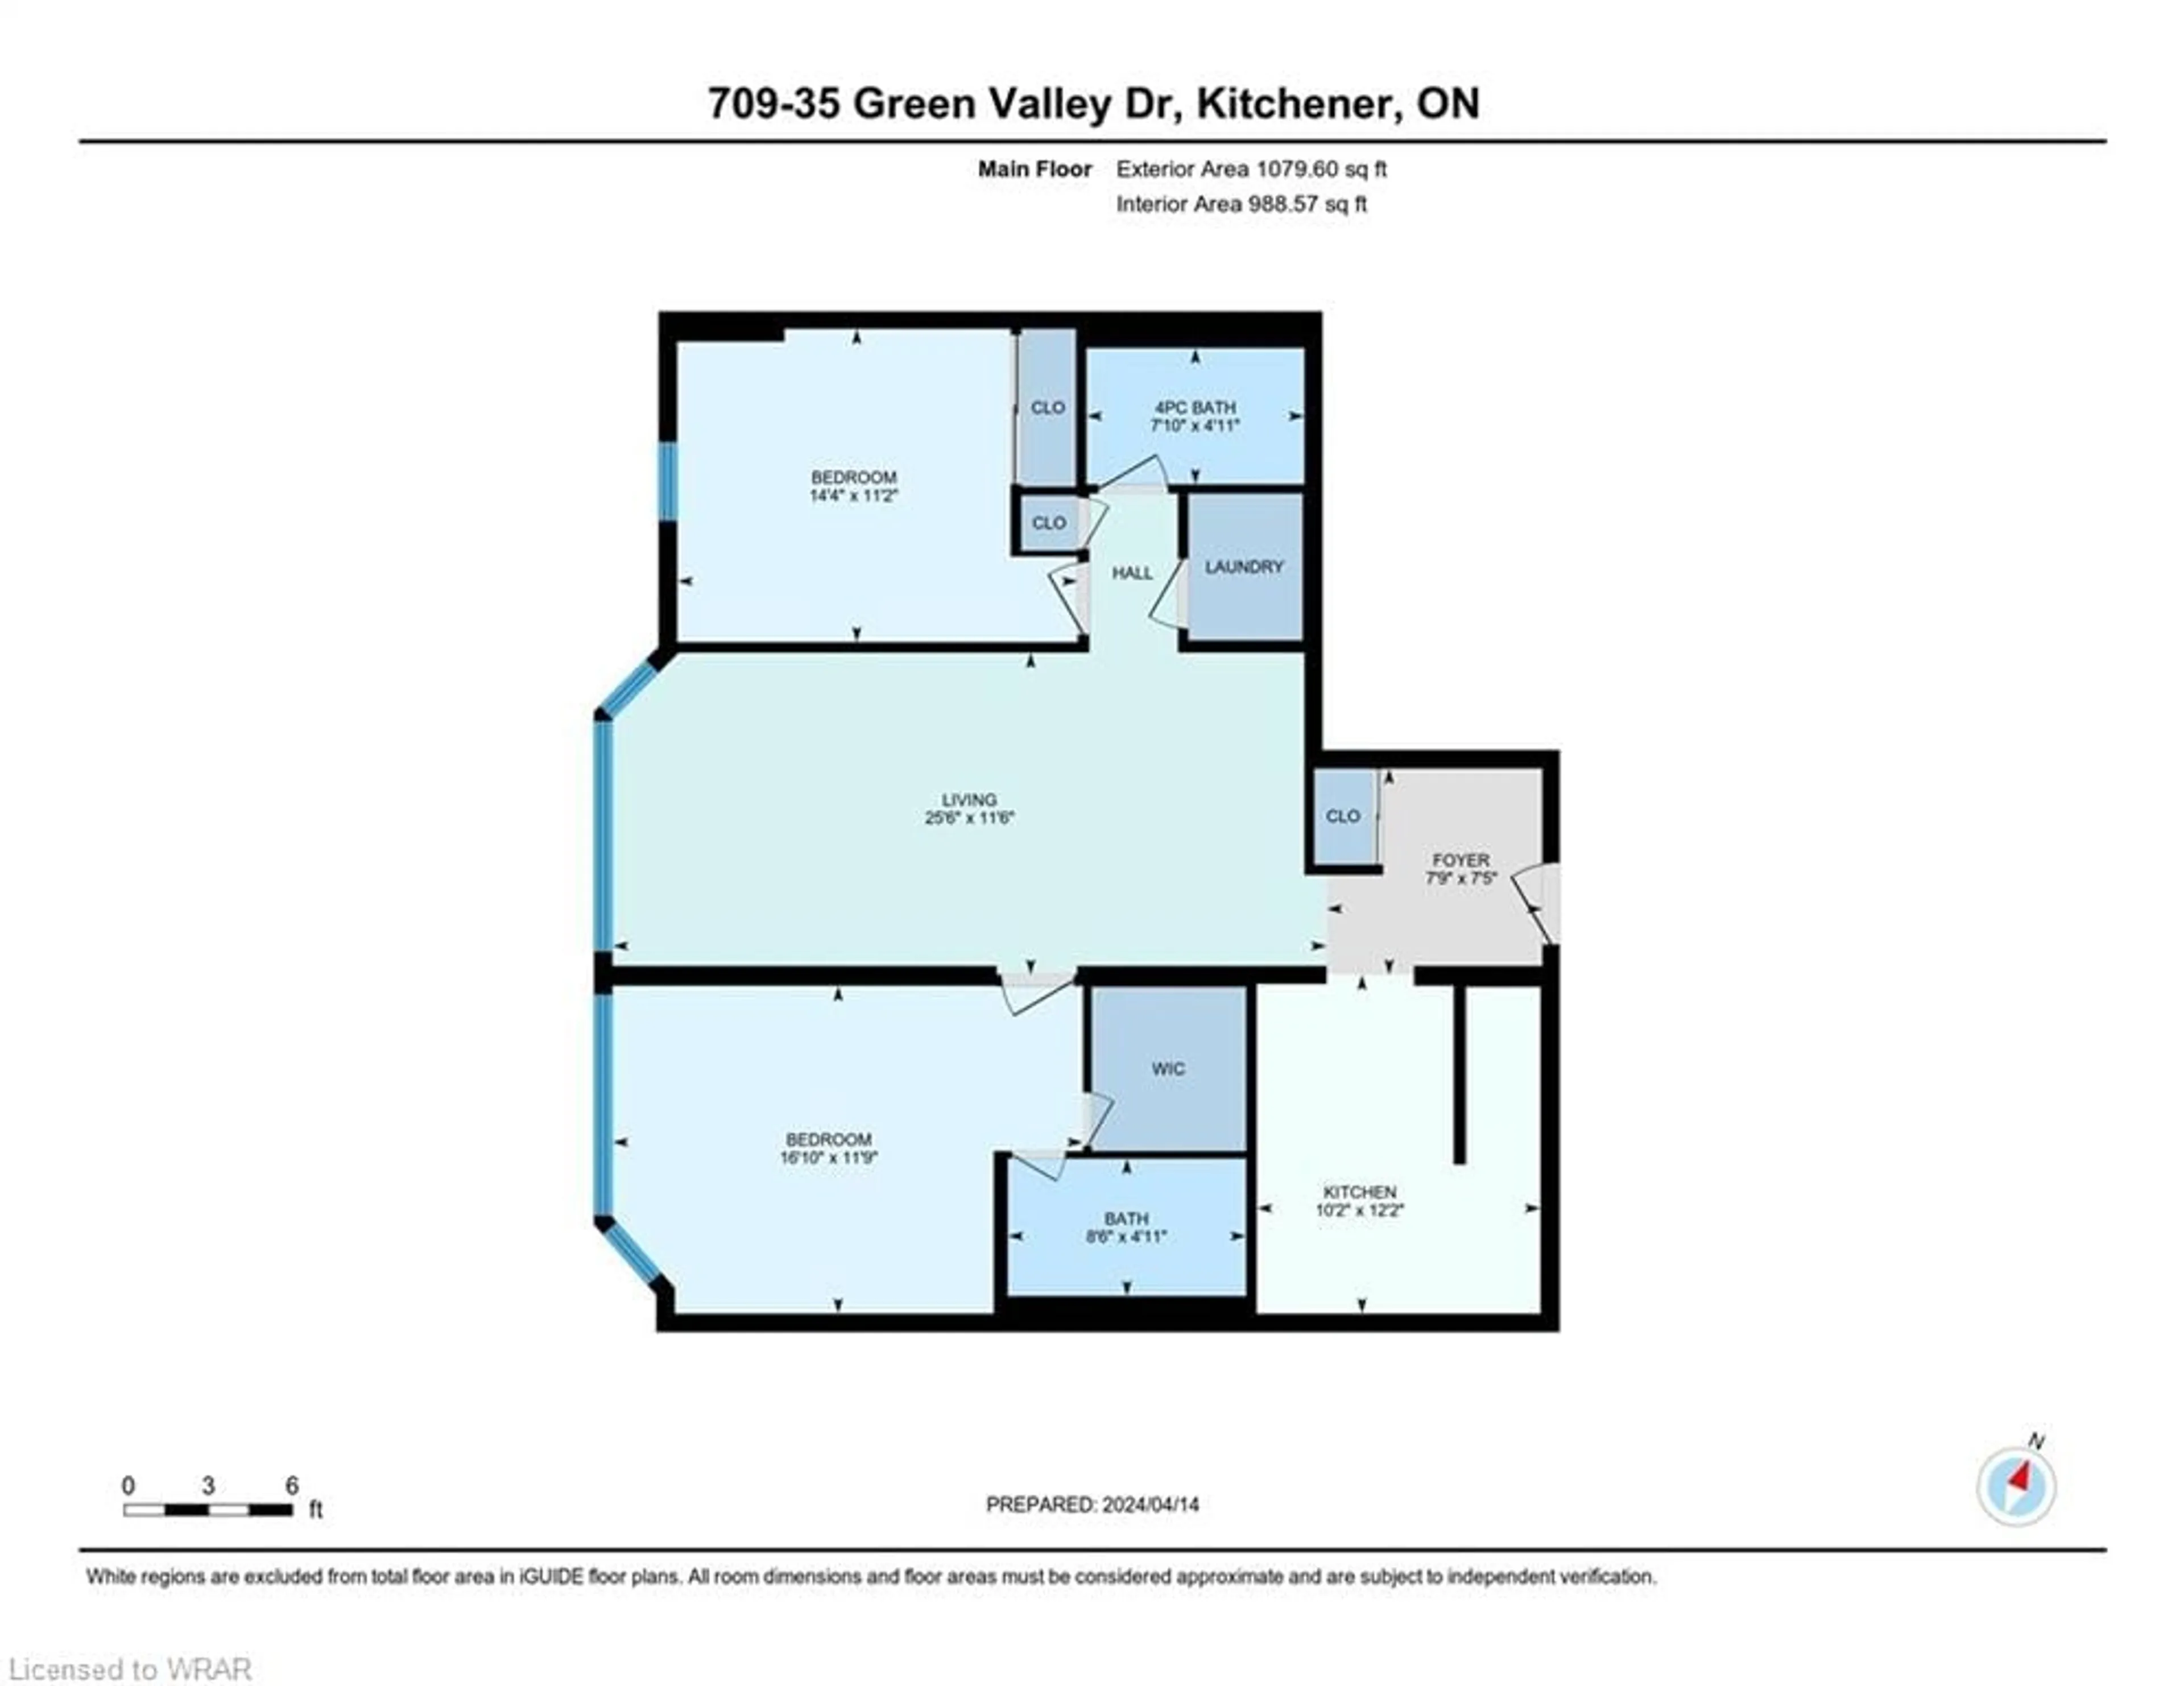 Floor plan for 35 Green Valley Dr #709, Kitchener Ontario N2P 2A5